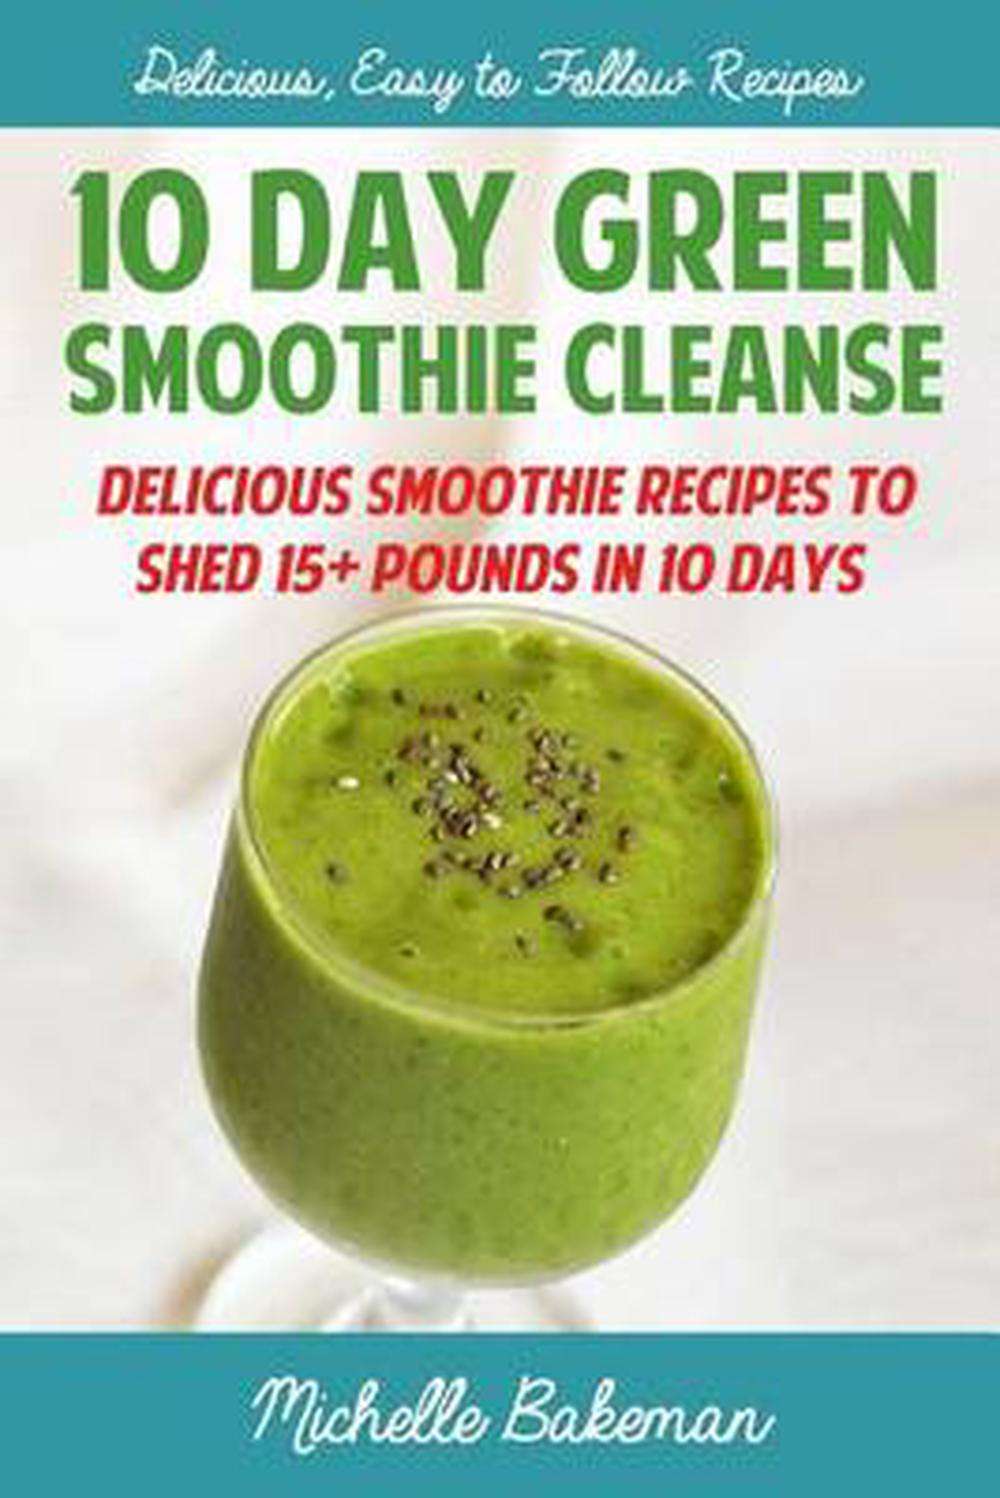 10 Day Green Smoothie Cleanse: Delicious Smoothie Recipes ...